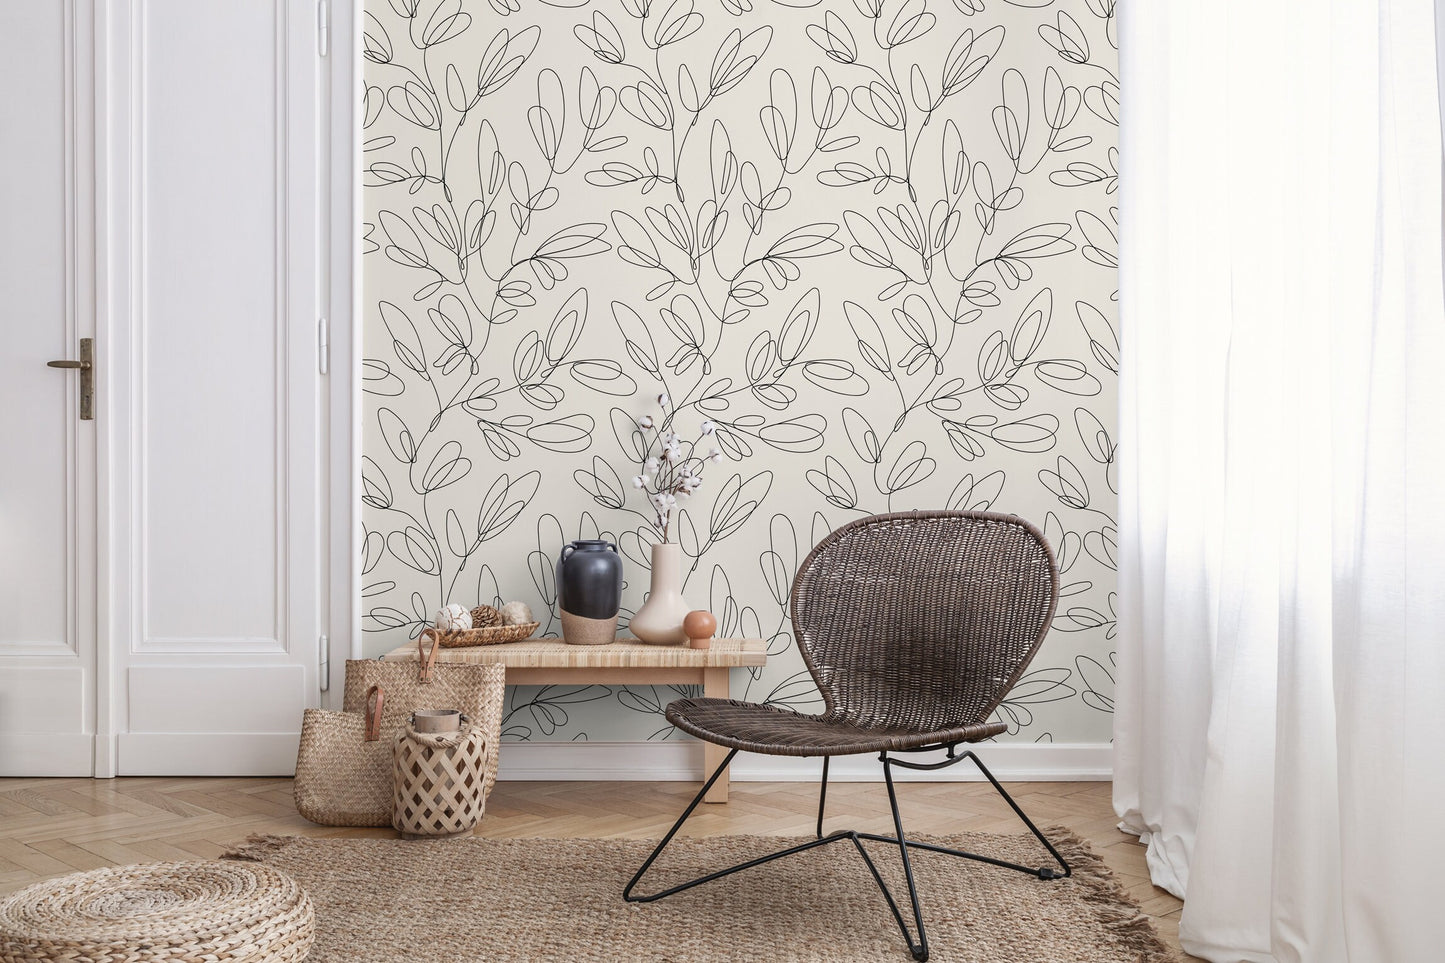 Wallpaper Peel and Stick Wallpaper Removable Wallpaper Home Decor Wall Art Wall Decor Room Decor / Abstract Boho Leaves Wallpaper - C355